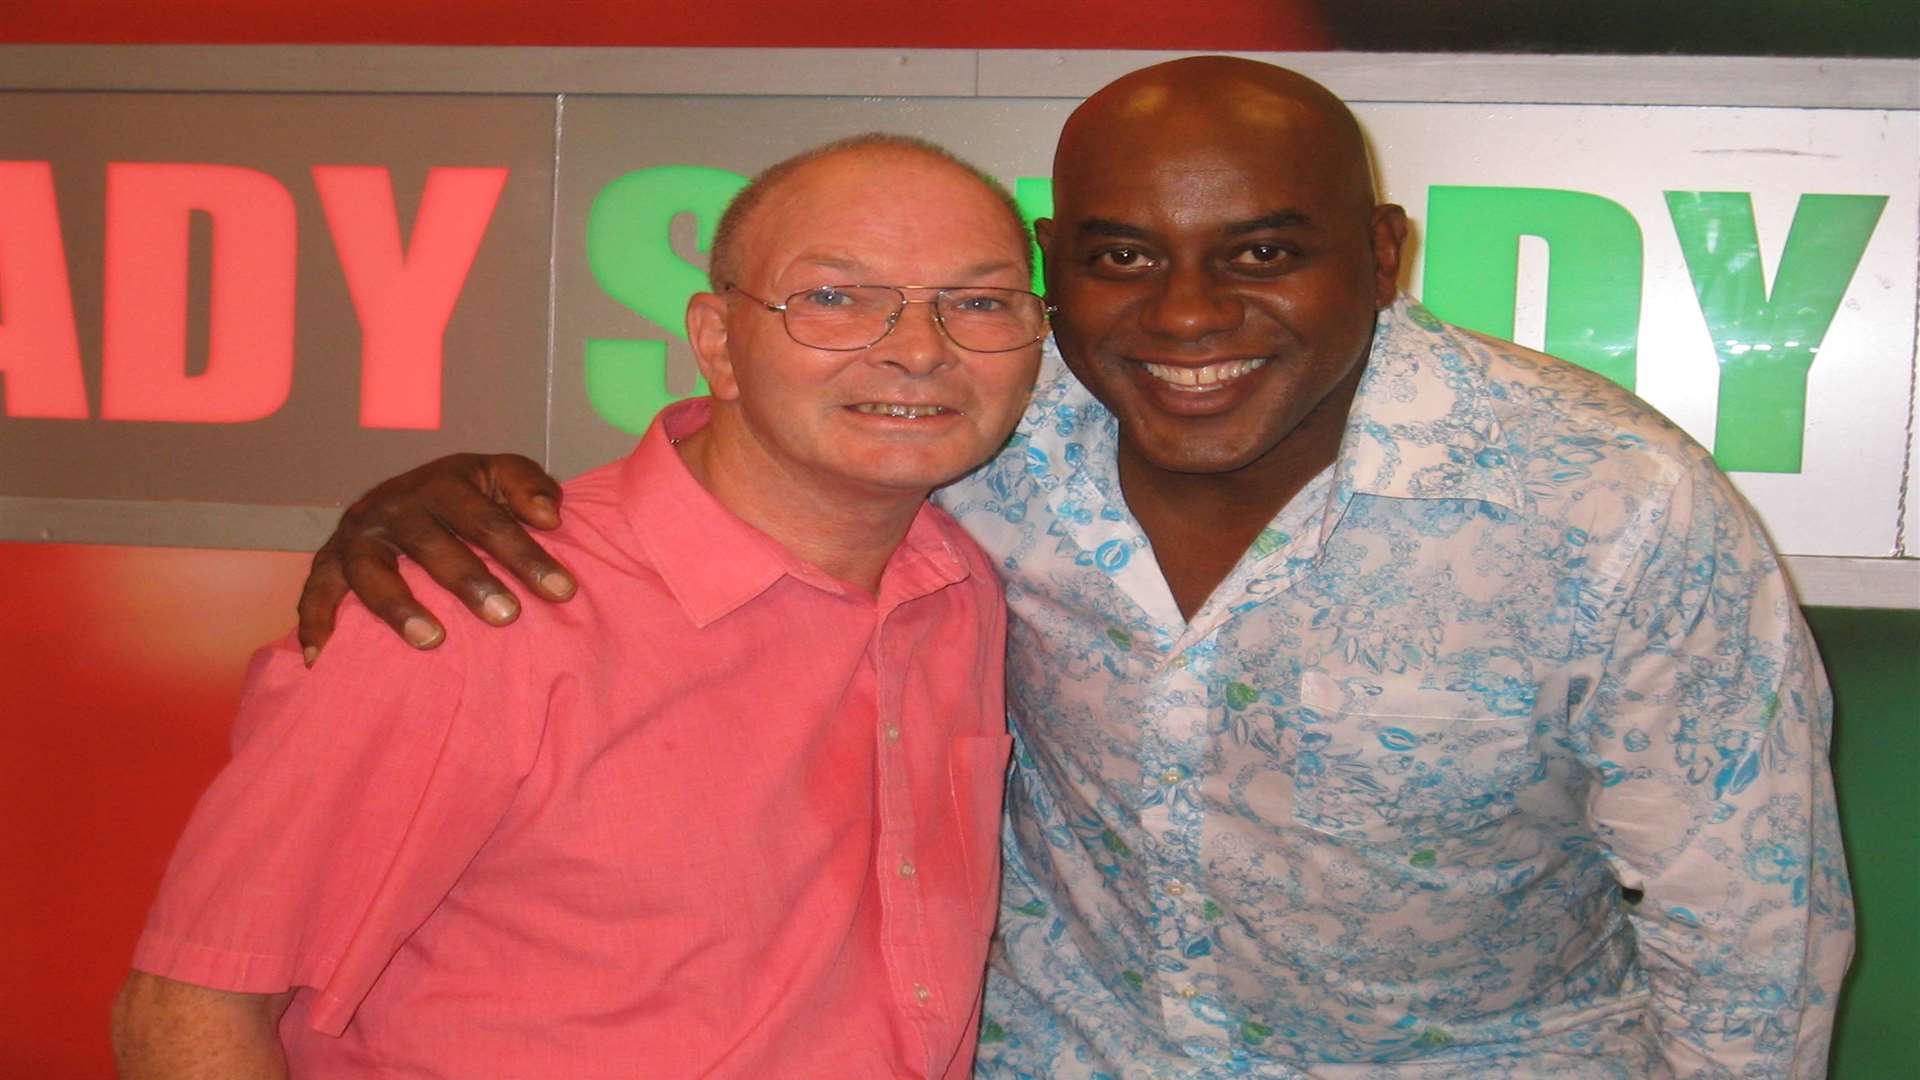 Record breaker Ted Hannaford from Sittingbourne with Ainsley Harriott on TV's Ready Steady Cook programme